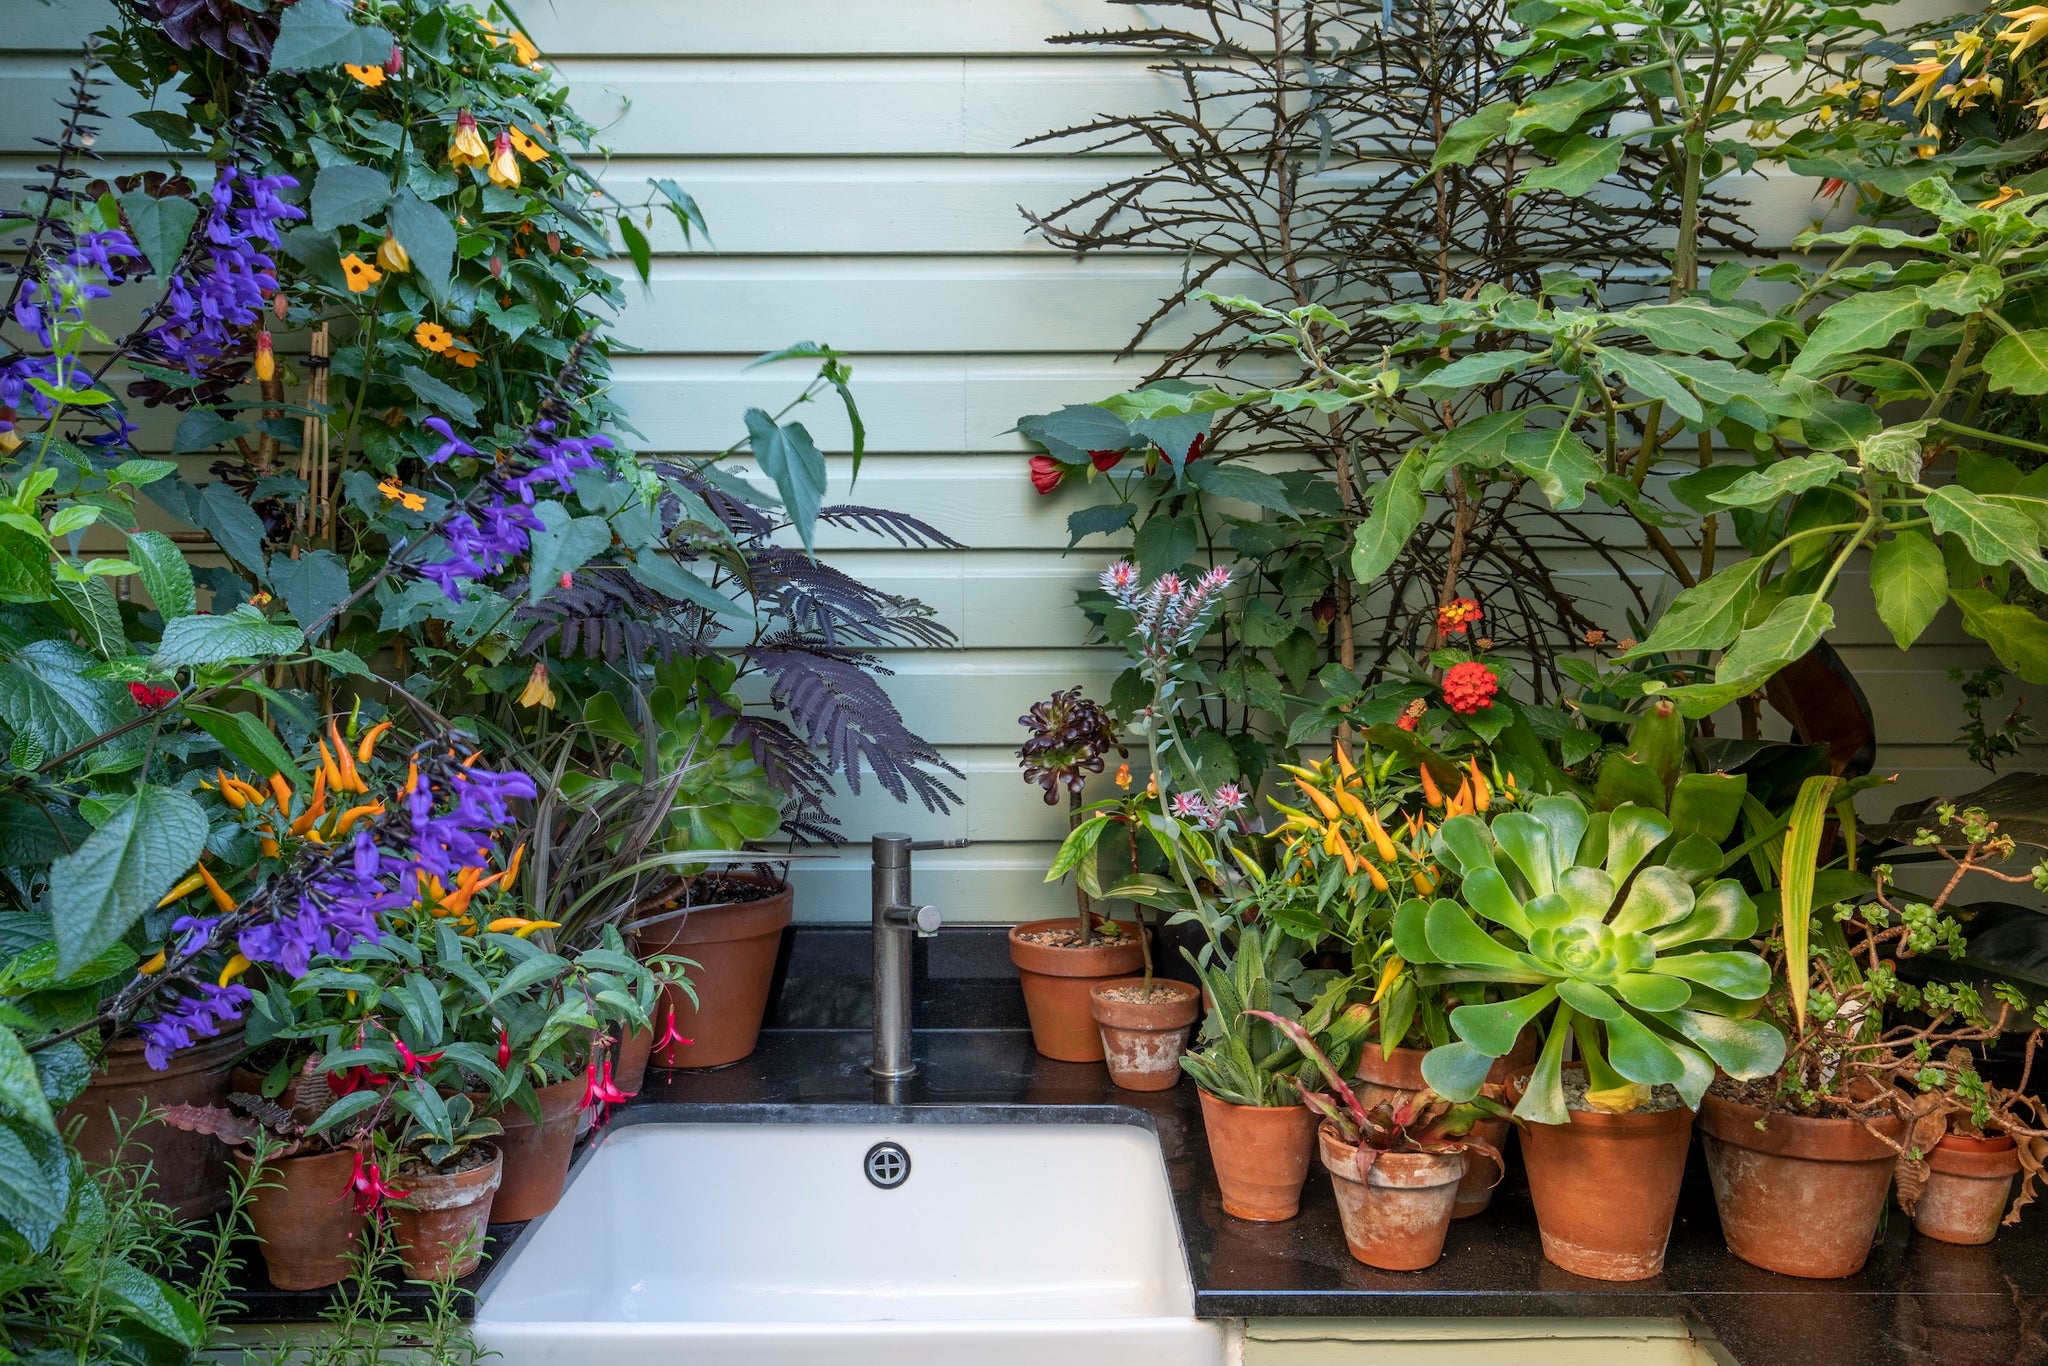 Outdoor kitchen sink with plants